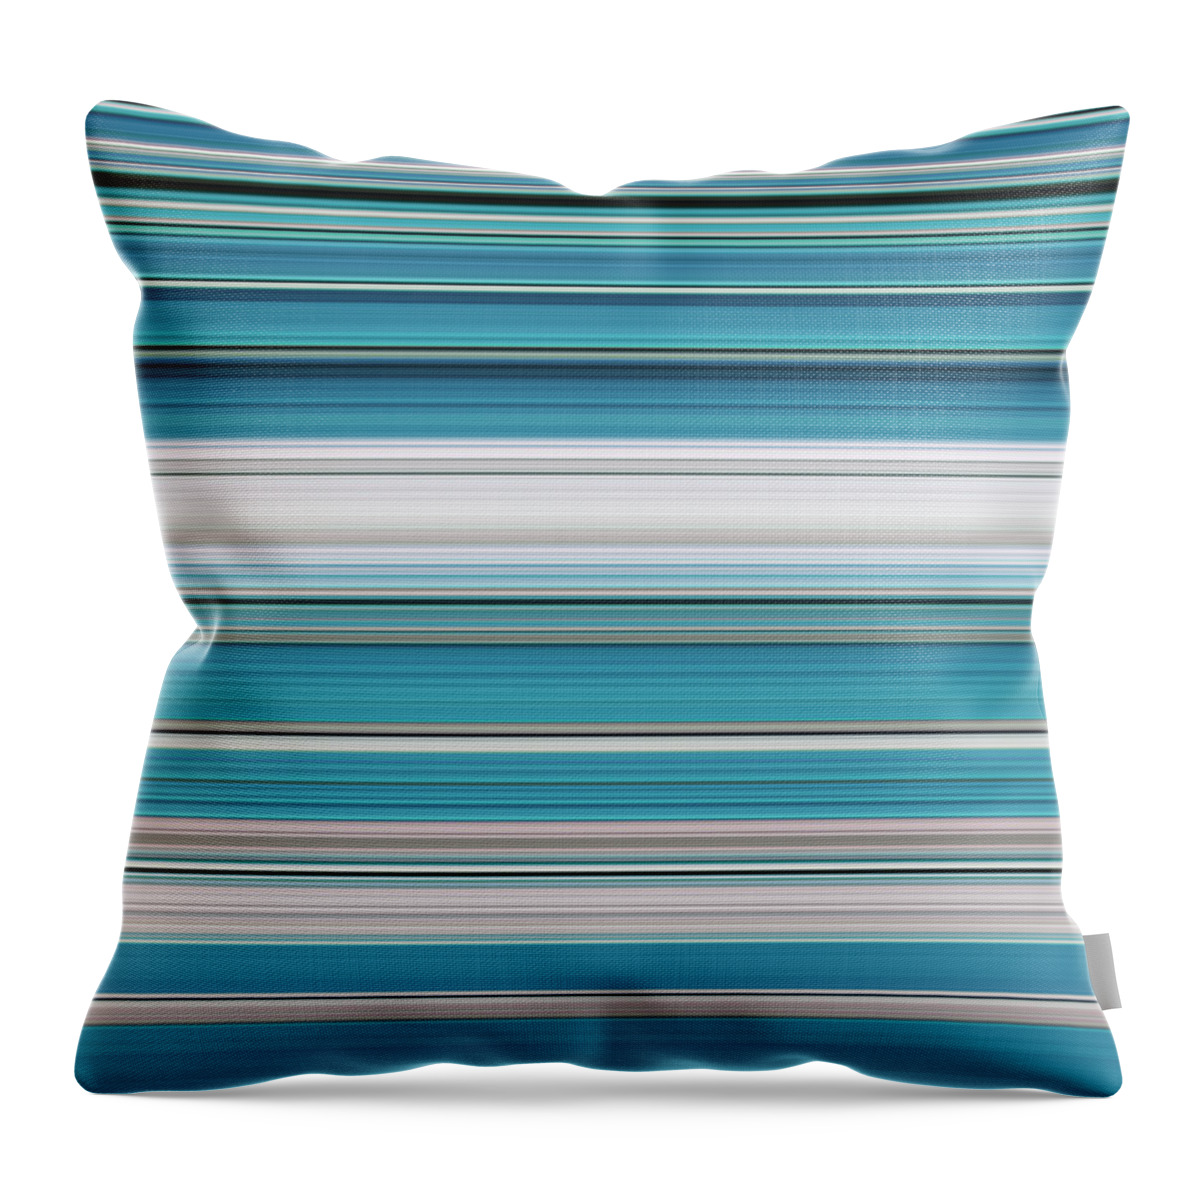 Teal Throw Pillow featuring the photograph Teal Lines by Tim Gainey